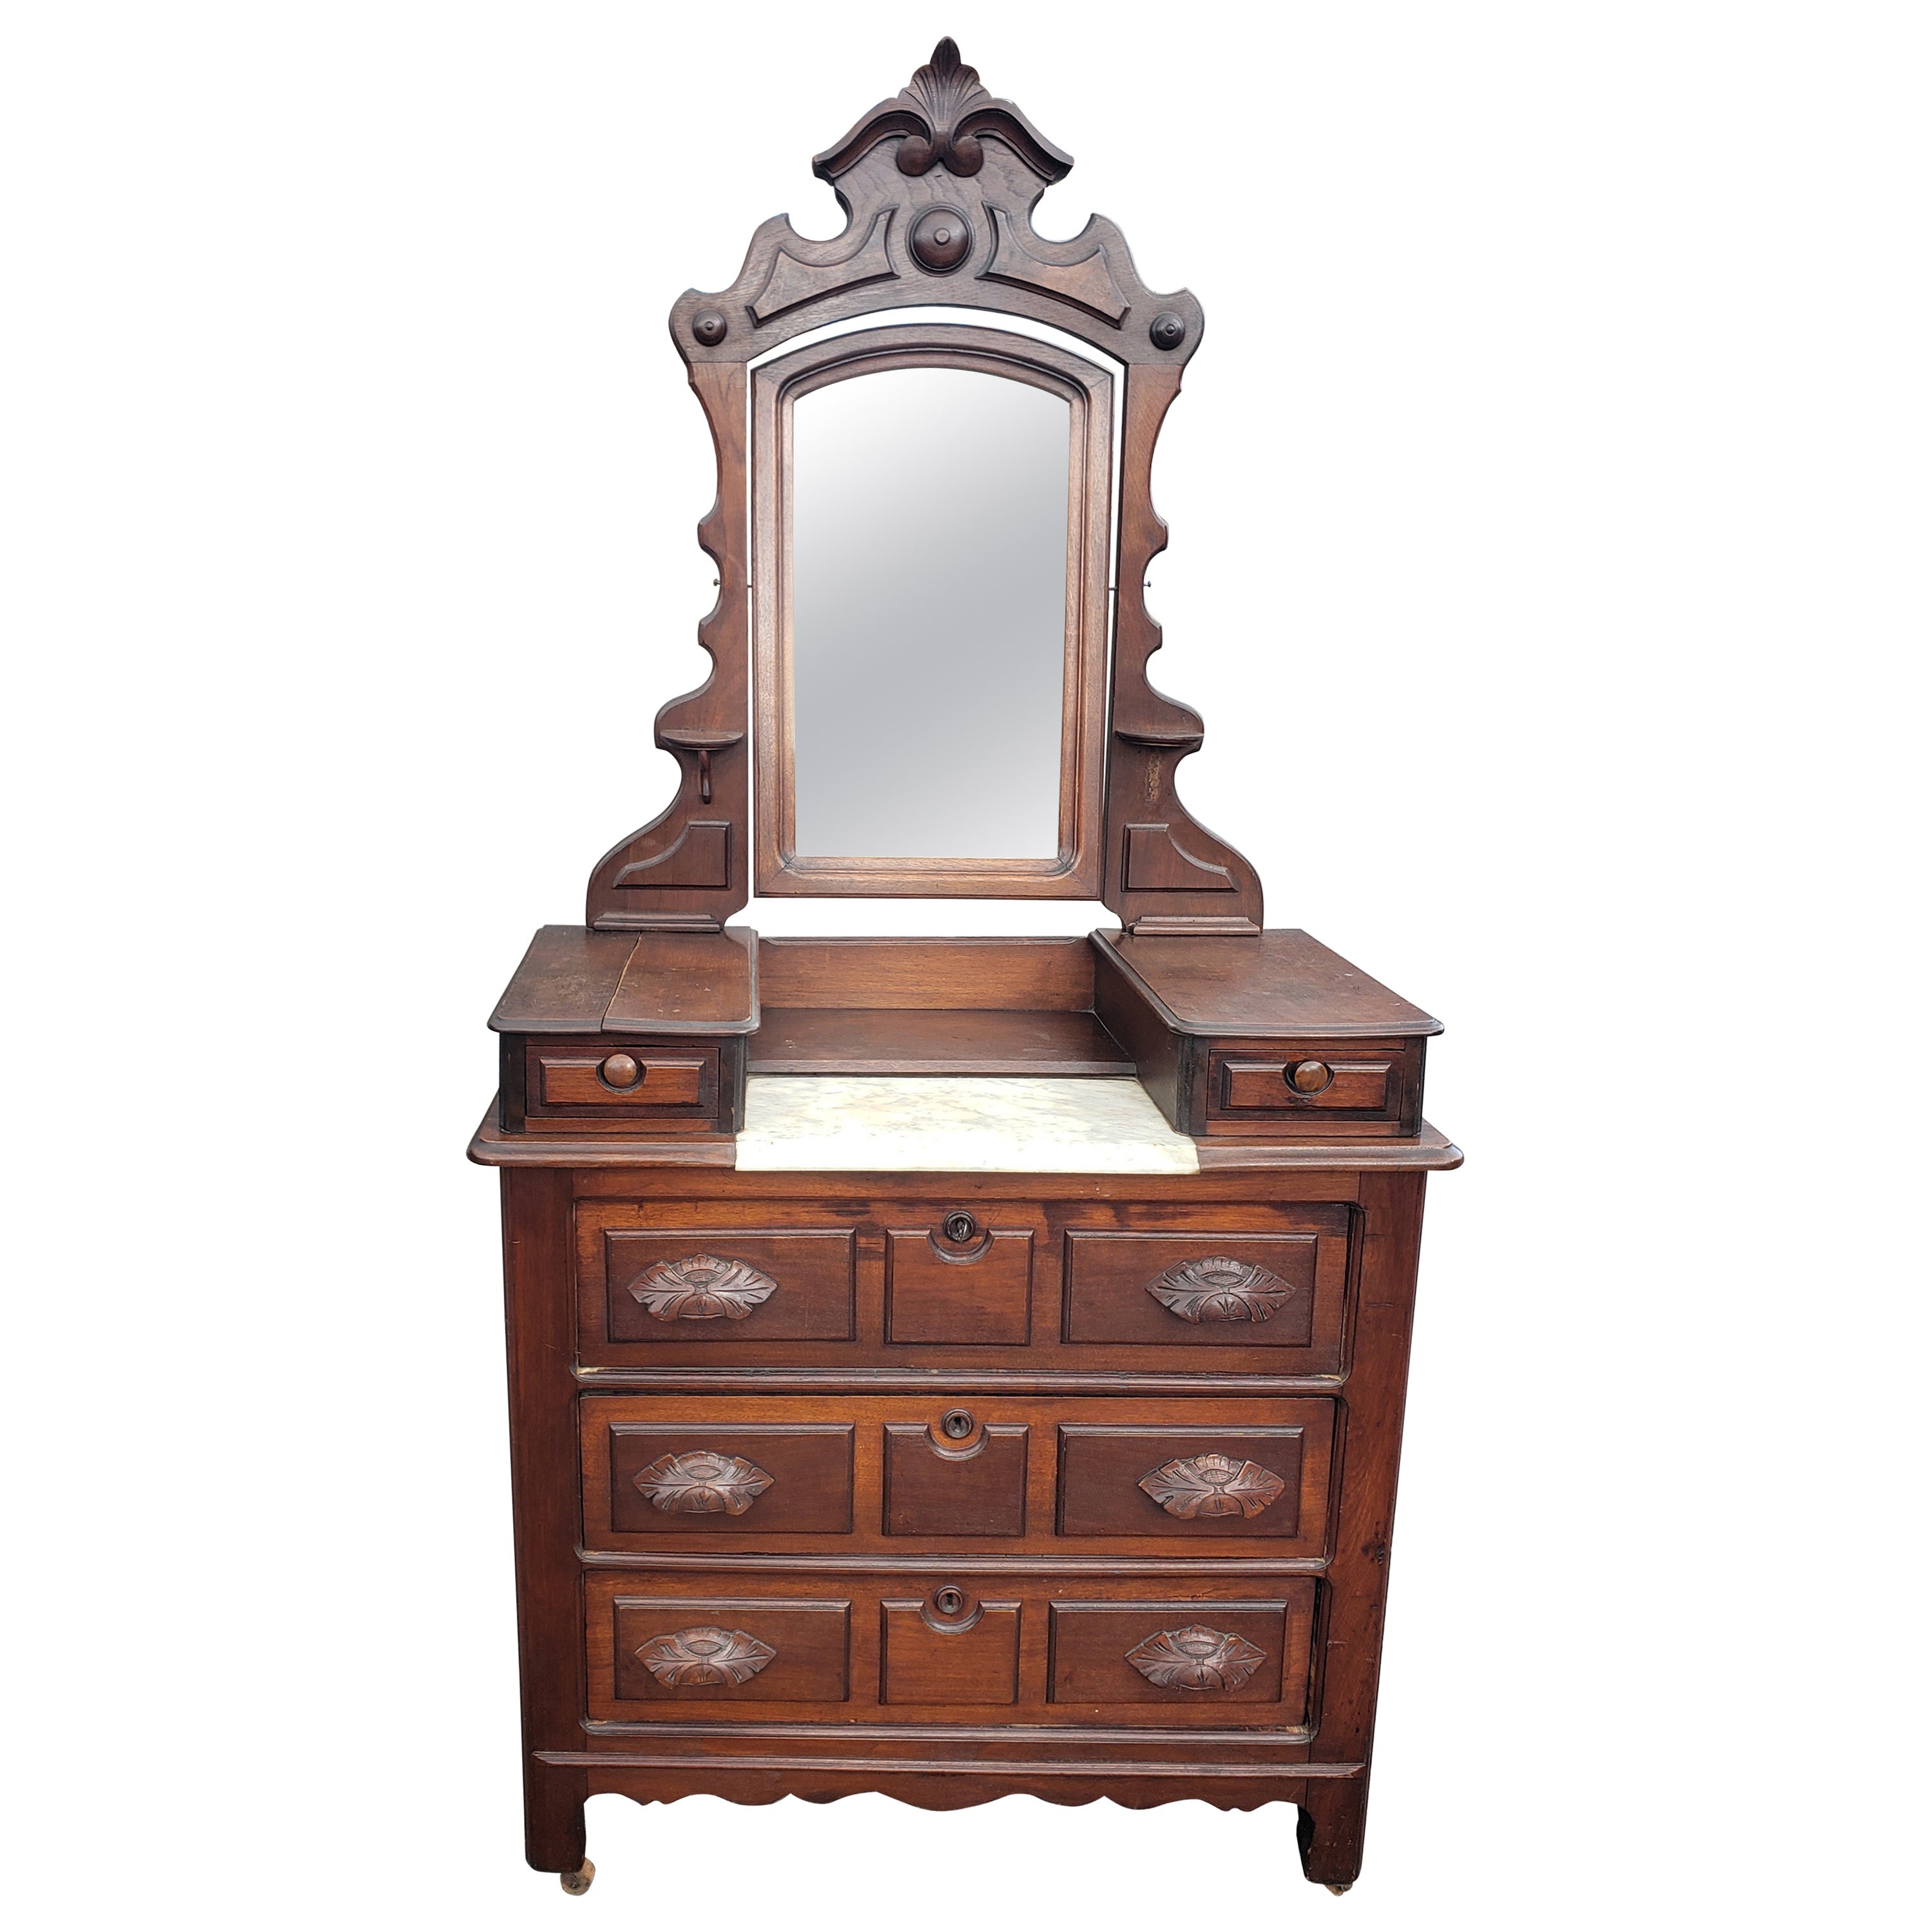 19th C. American Empire Eastlake Mahogany Dresser w/ Marble Top Inset and Mirror For Sale